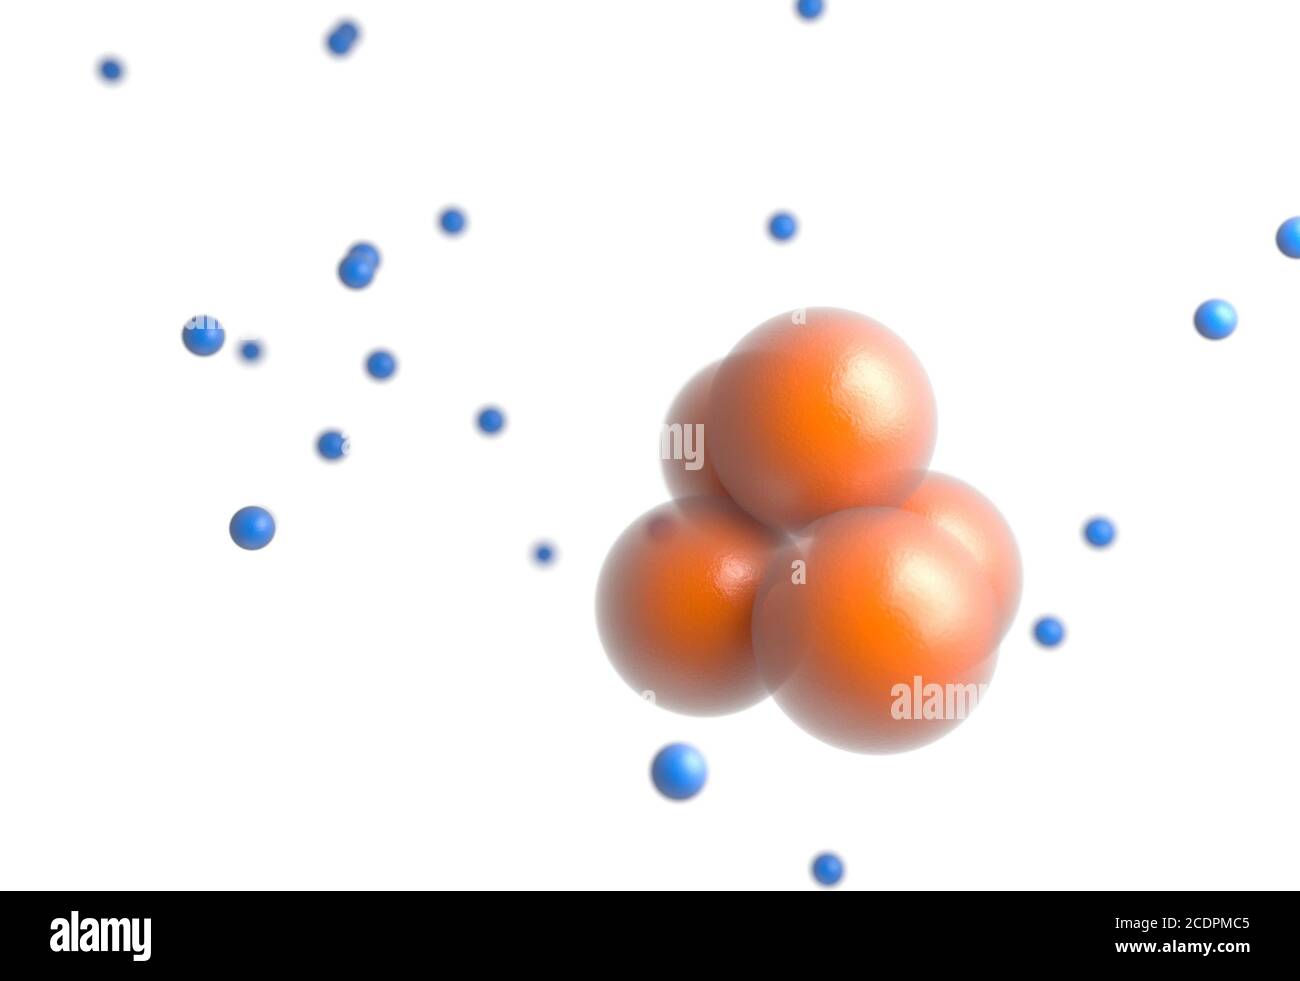 Atoms, Elements or Molecules abstract 3d illustration. Stock Photo